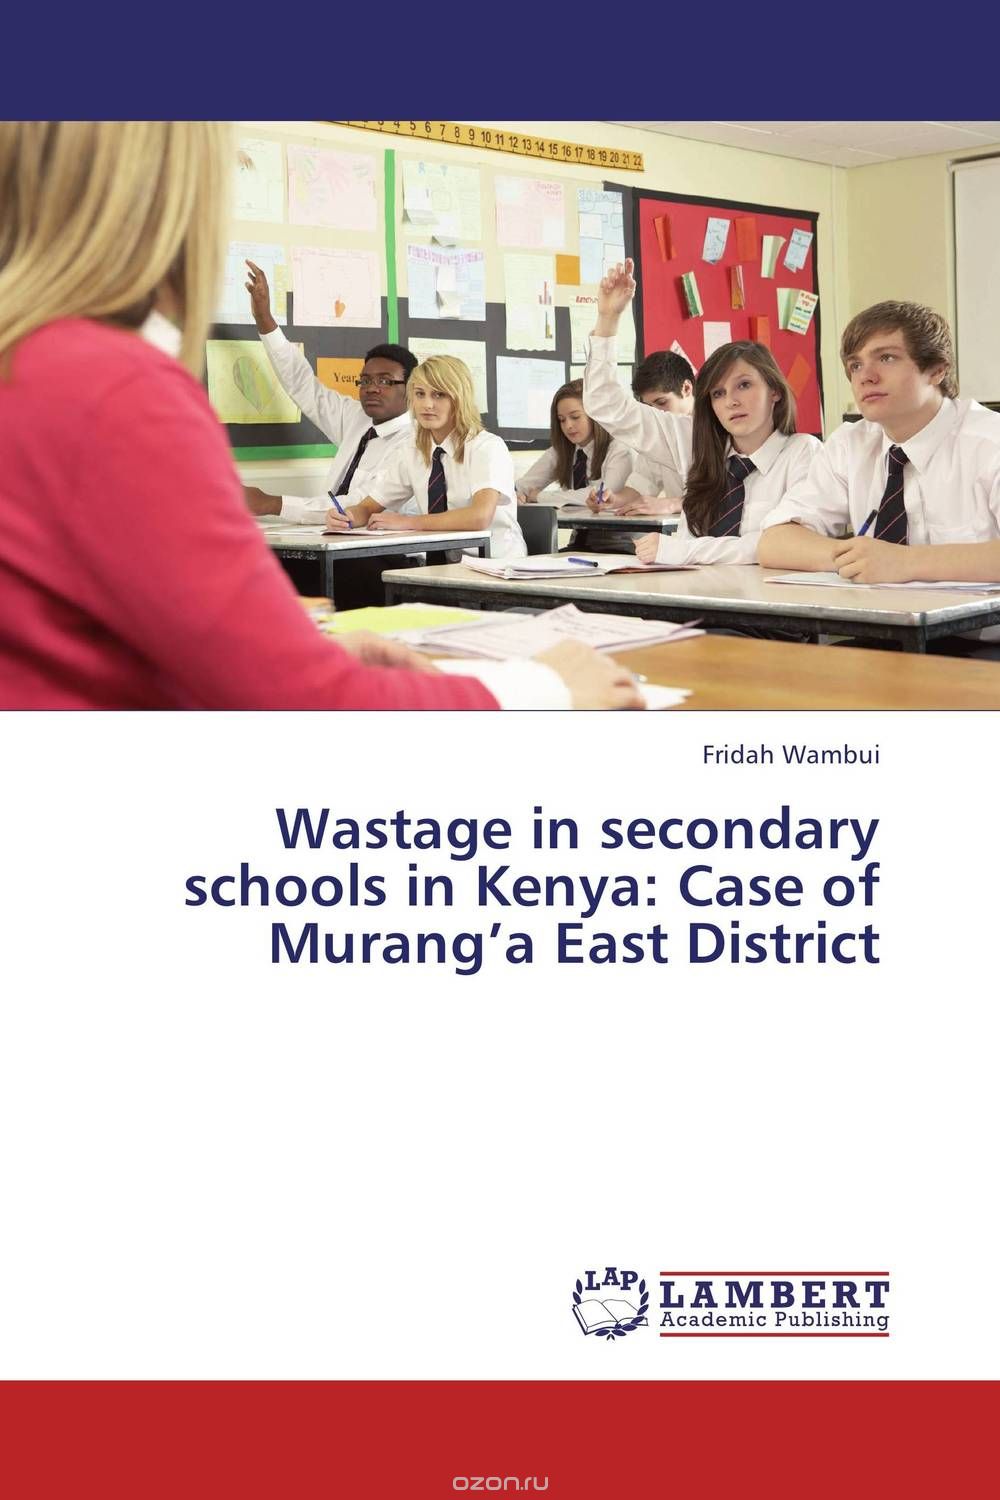 Wastage in secondary schools in Kenya: Case of Murang’a East District